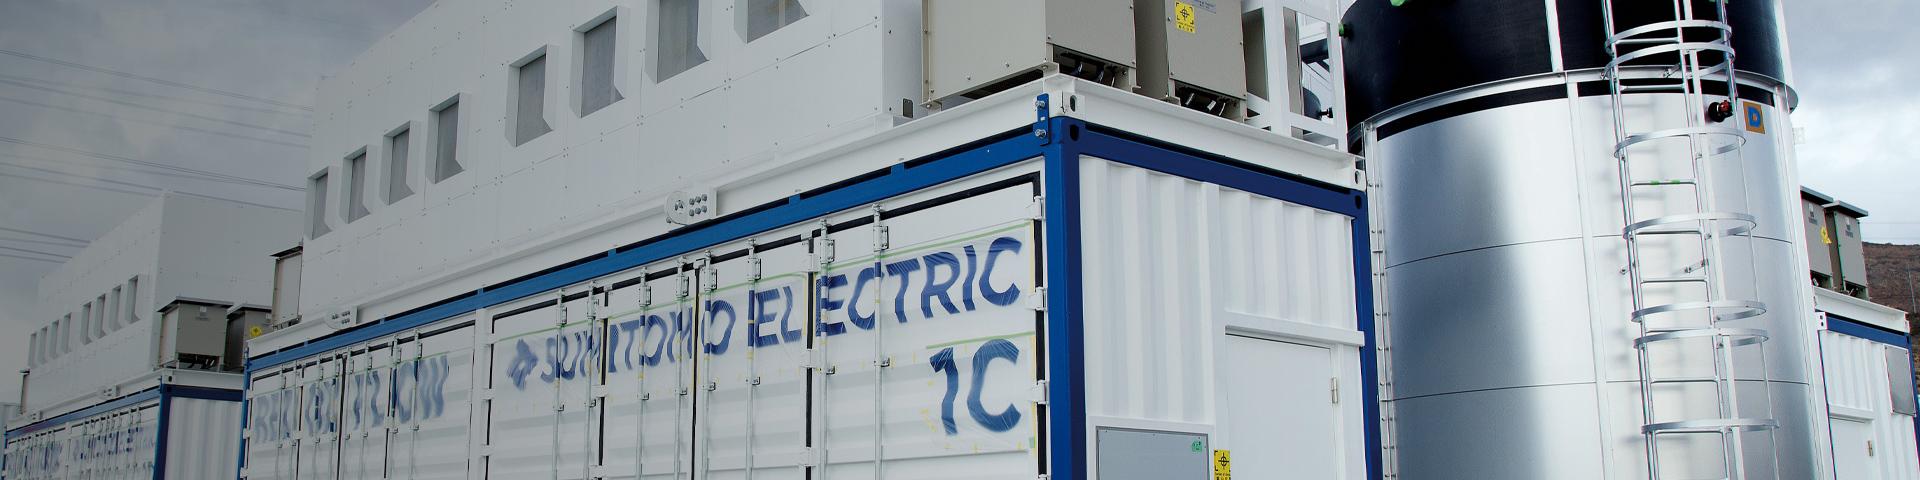 Redox flow energy storage battery system installed in California: 8,000 kWh (2,000 kW x 4 h)